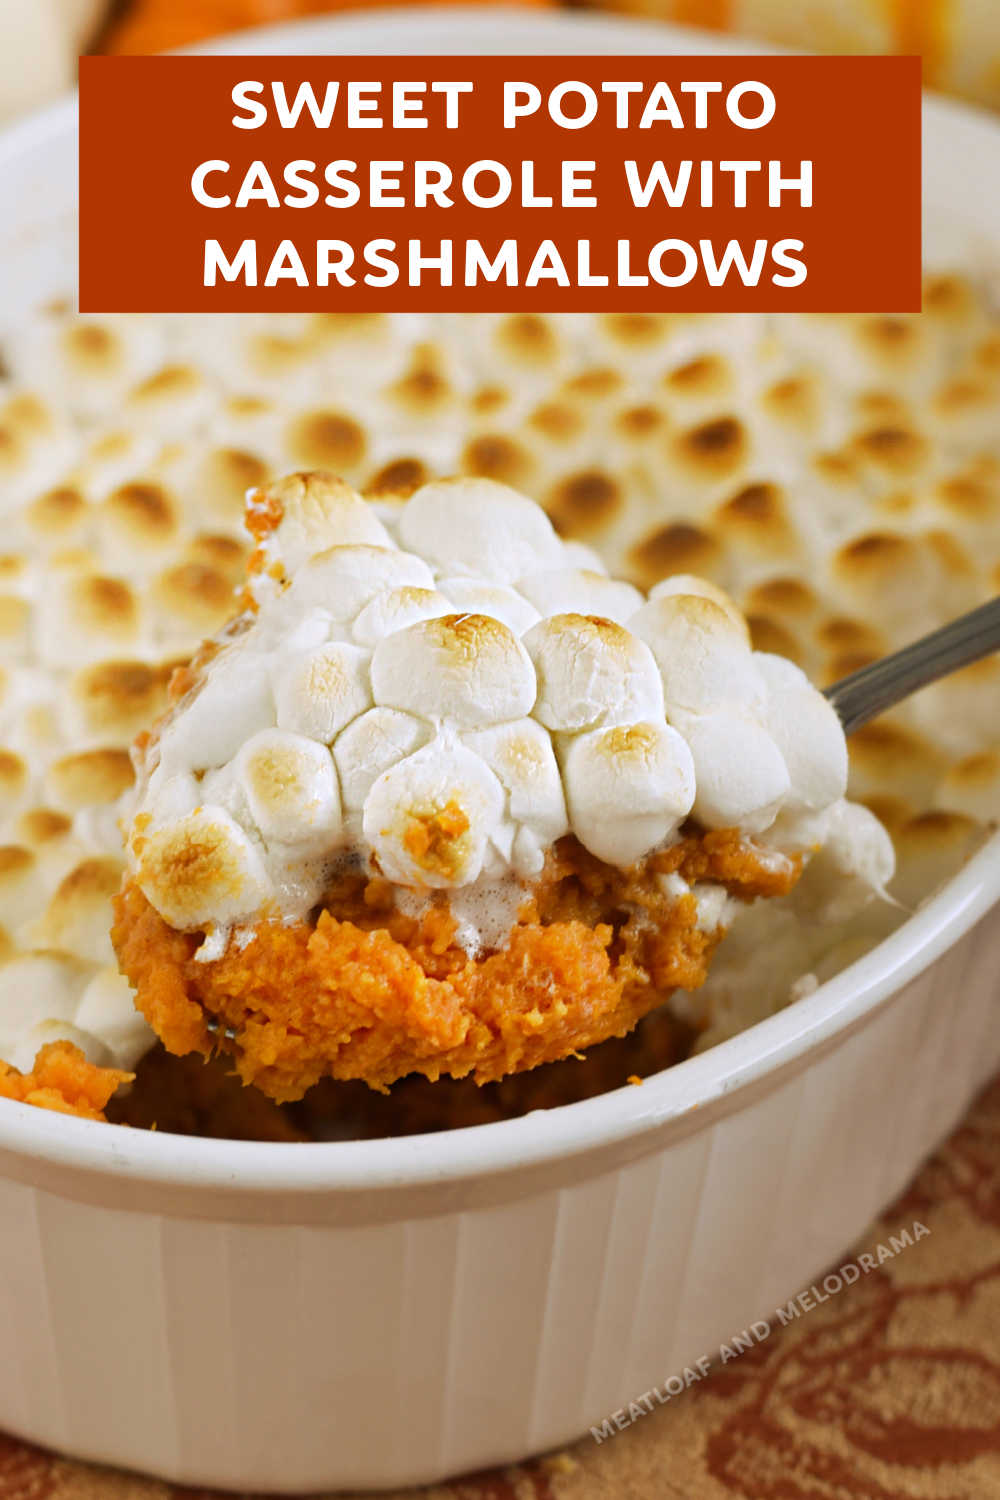 Sweet Potato Casserole with Marshmallows made with mashed sweet potatoes topped with gooey marshmallows is an easy Thanksgiving side dish.  Make ahead and reheat! A delicious addition to your Thanksgiving table or Christmas dinner! via @meamel